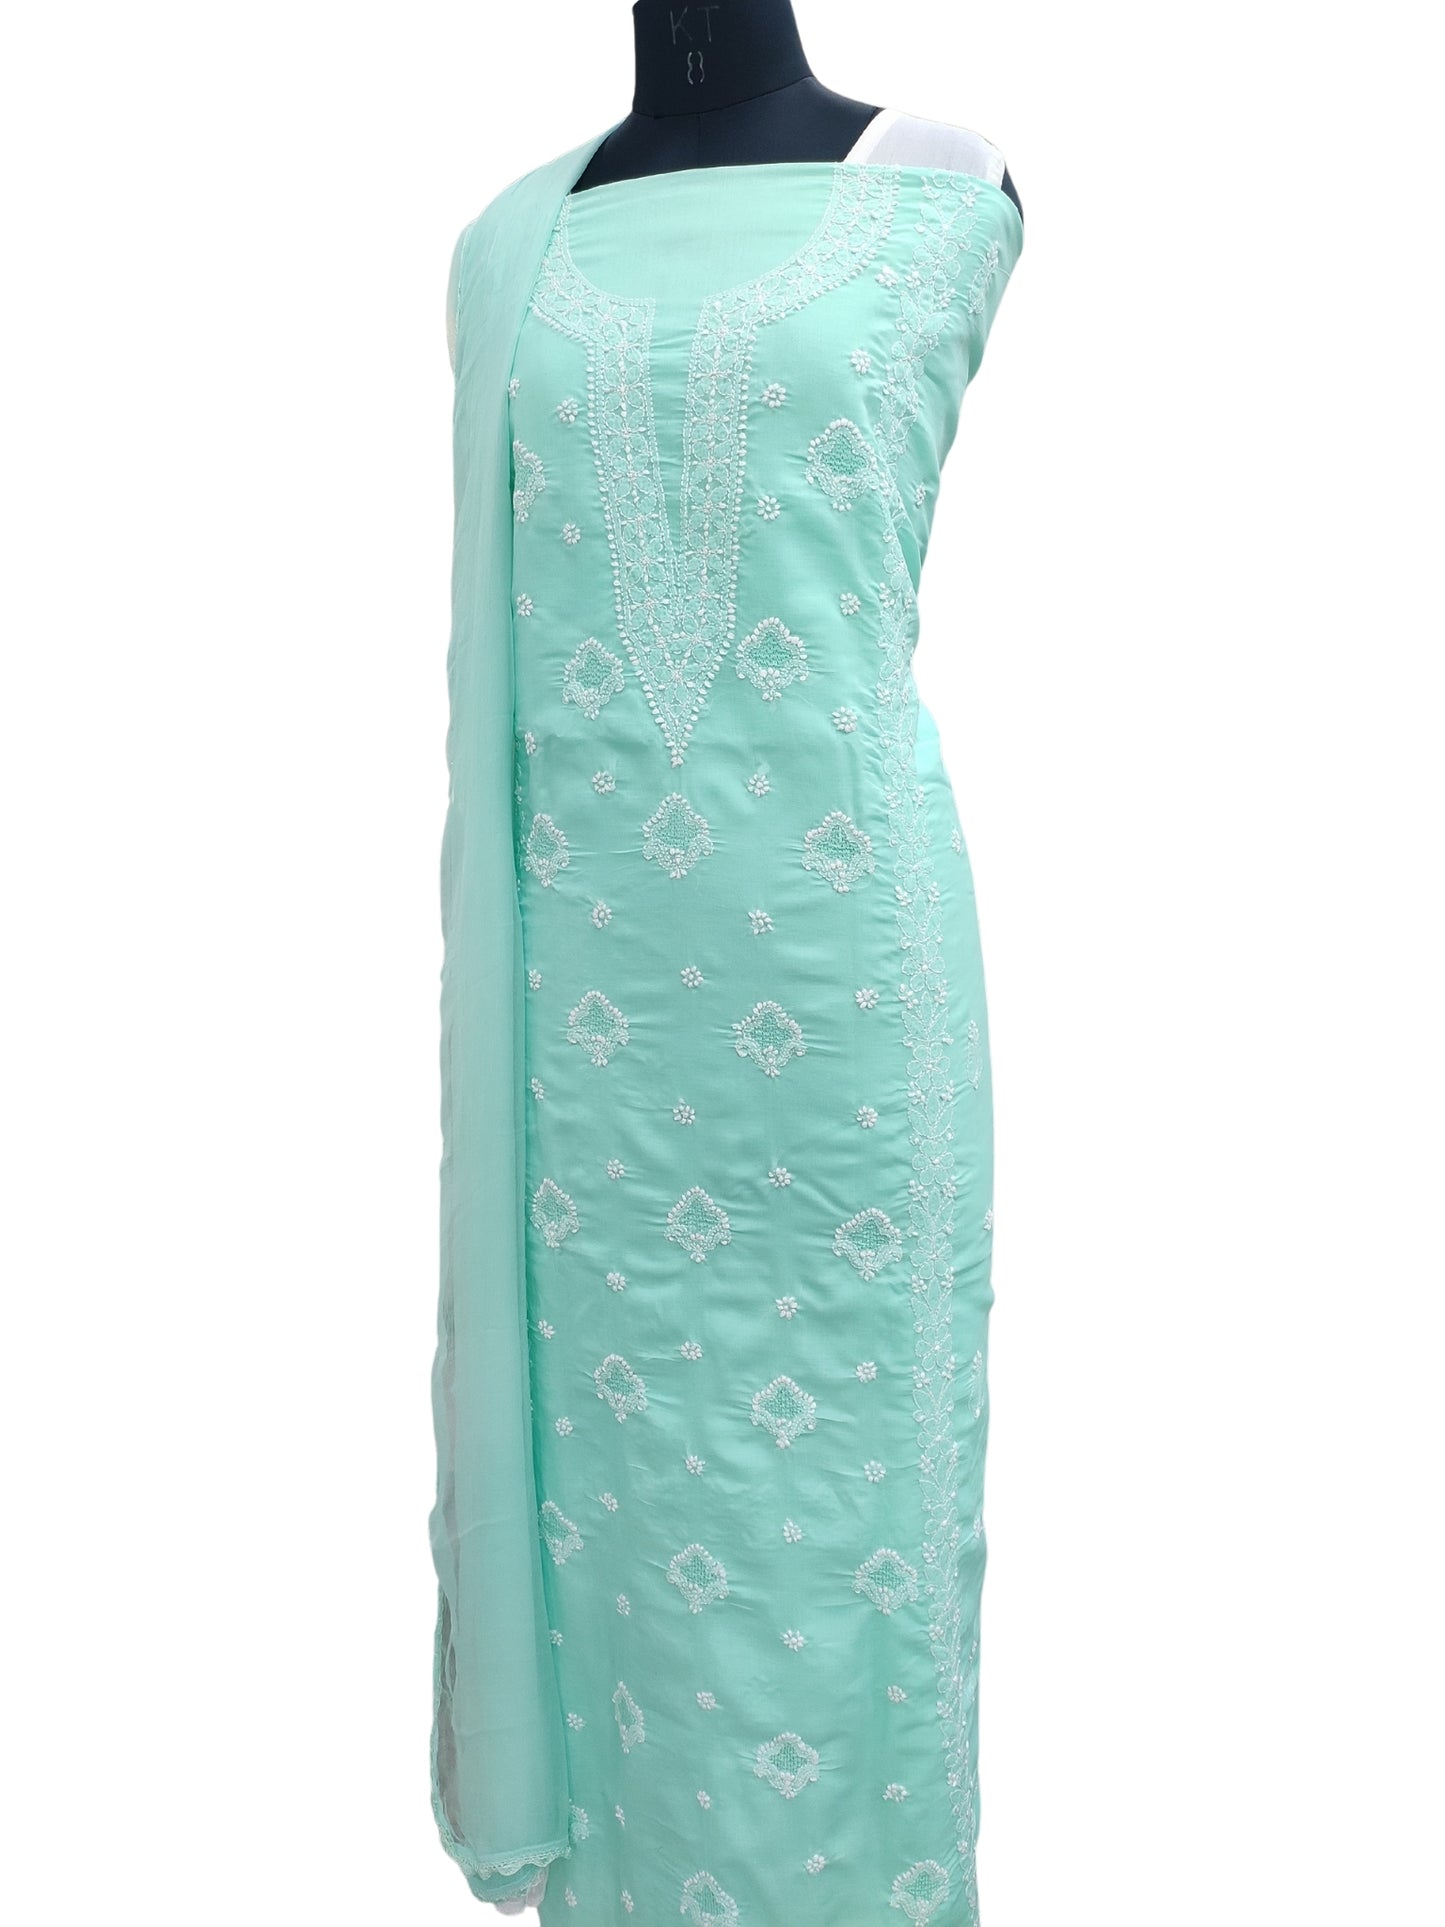 Shyamal Chikan Hand Embroidered Sea Green Cotton Lucknowi Chikankari Unstitched Suit Piece With Jaali Work - S22594